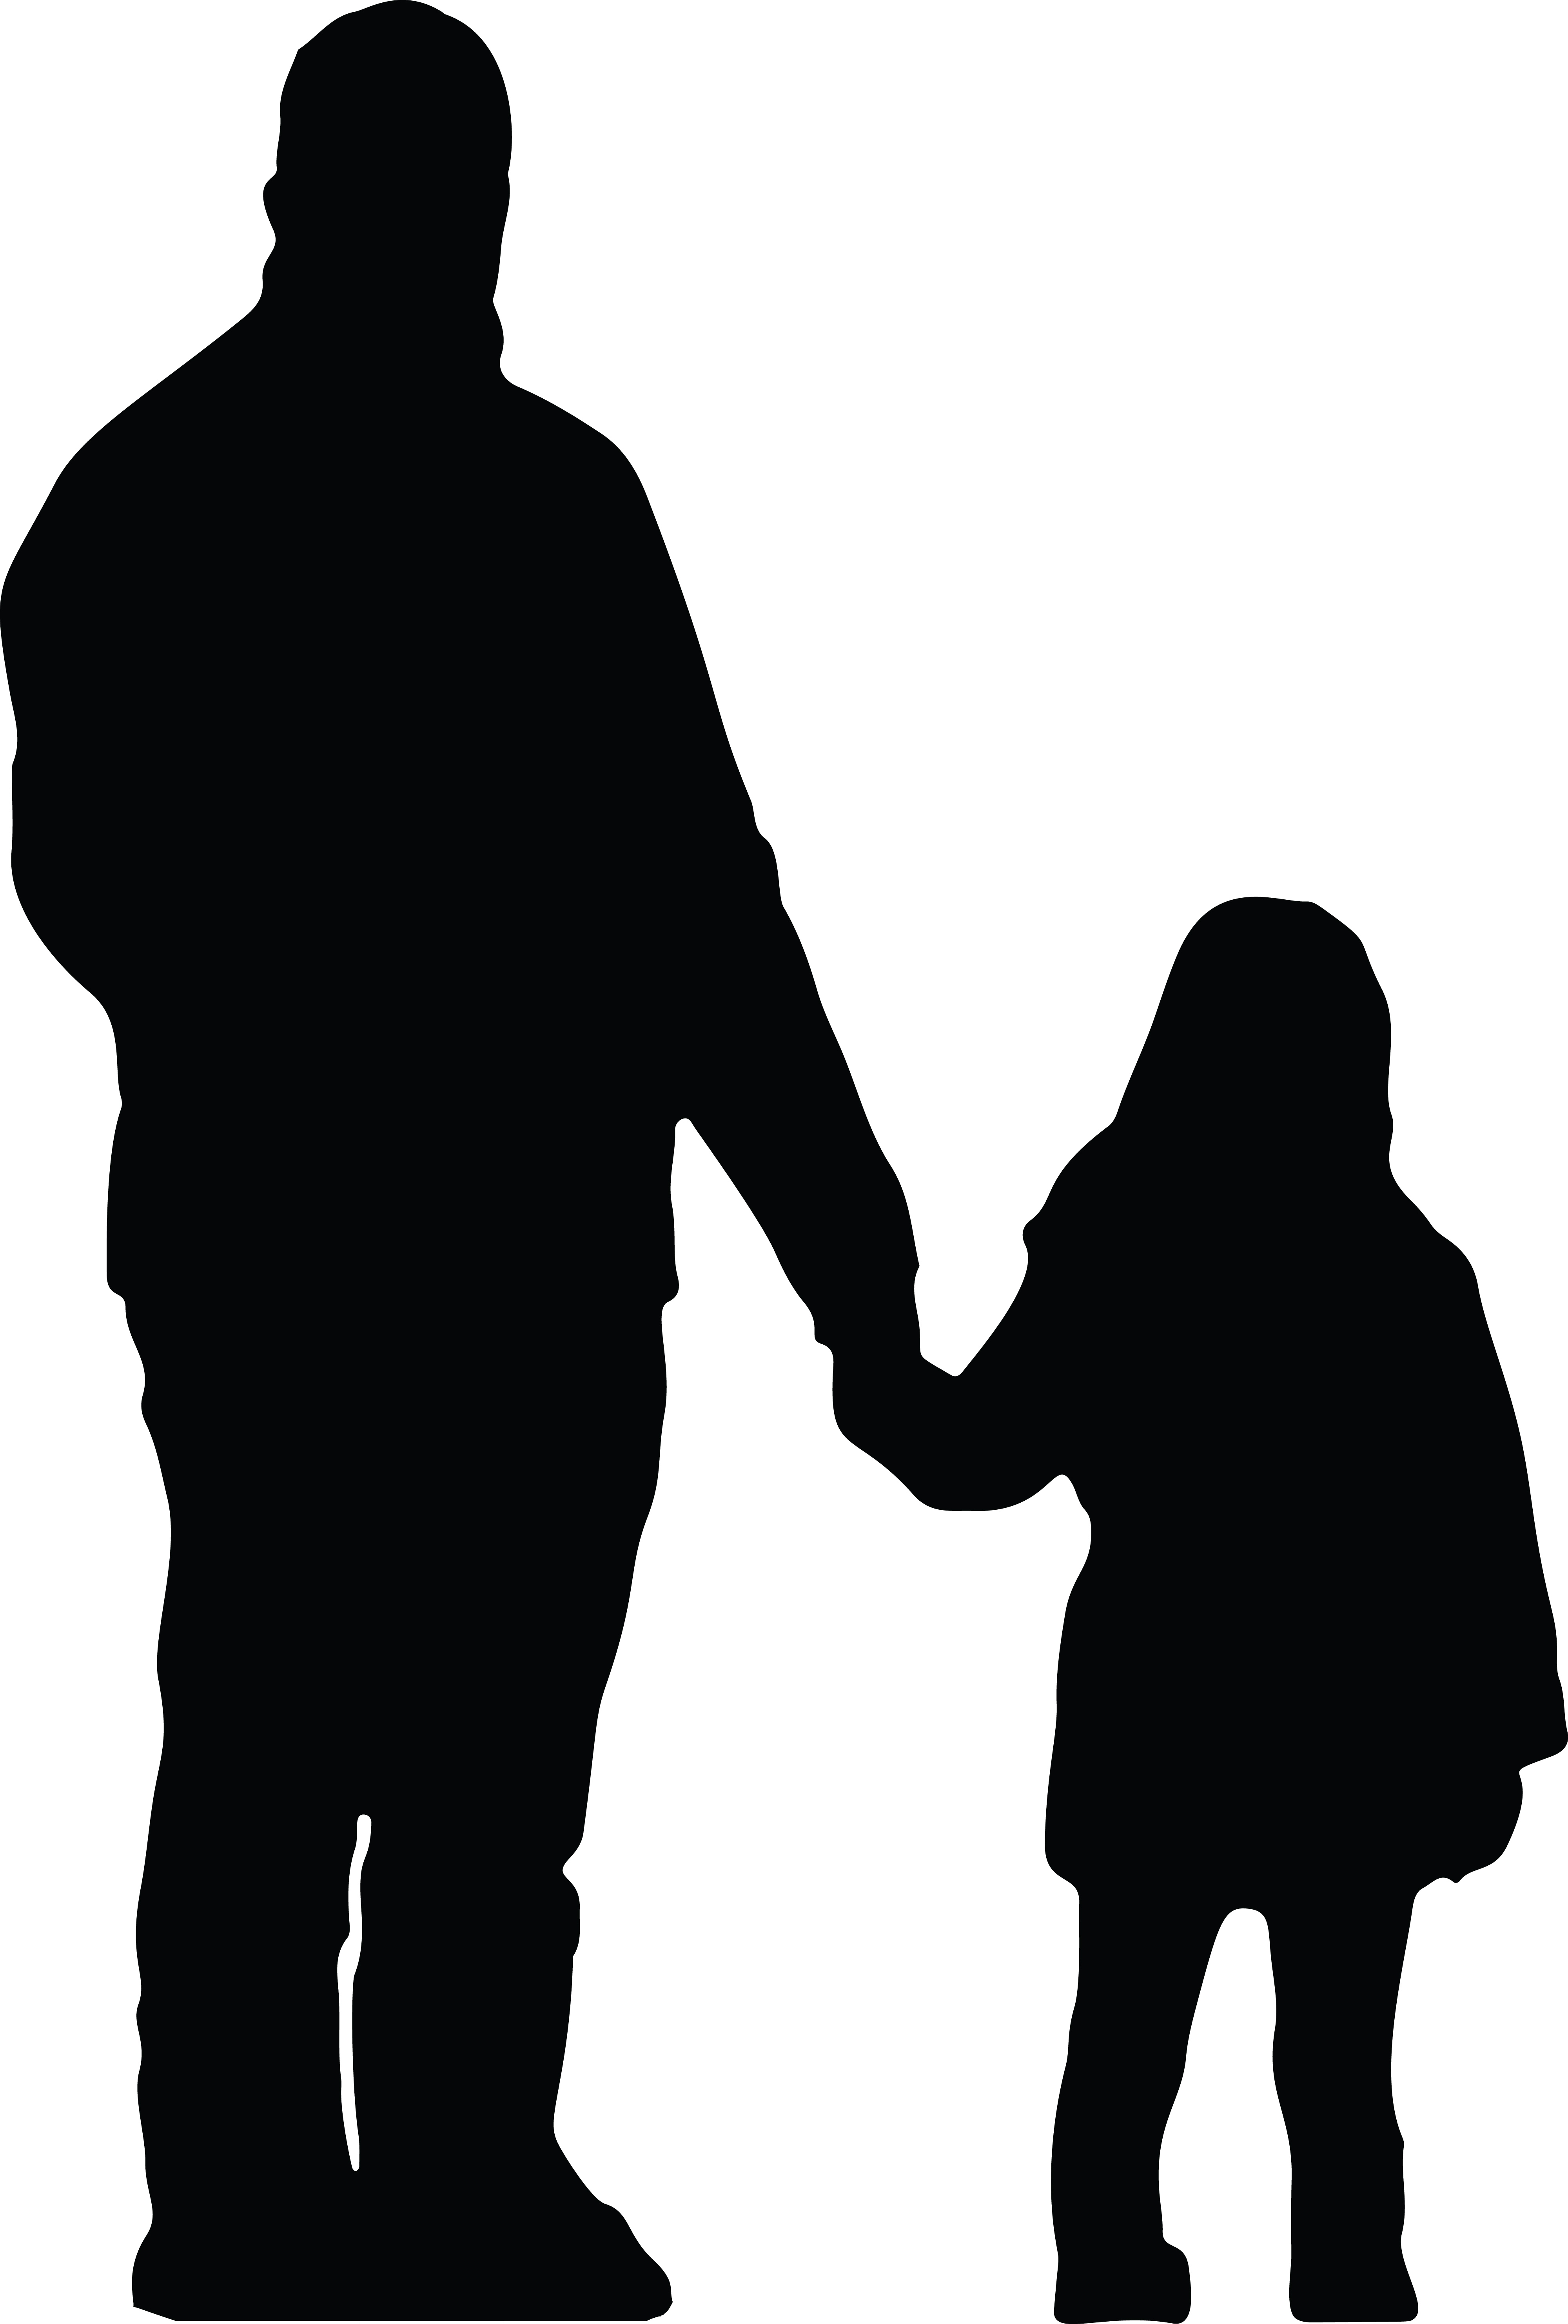 Download Free Clipart Of A silhouetted father holding hands with ...